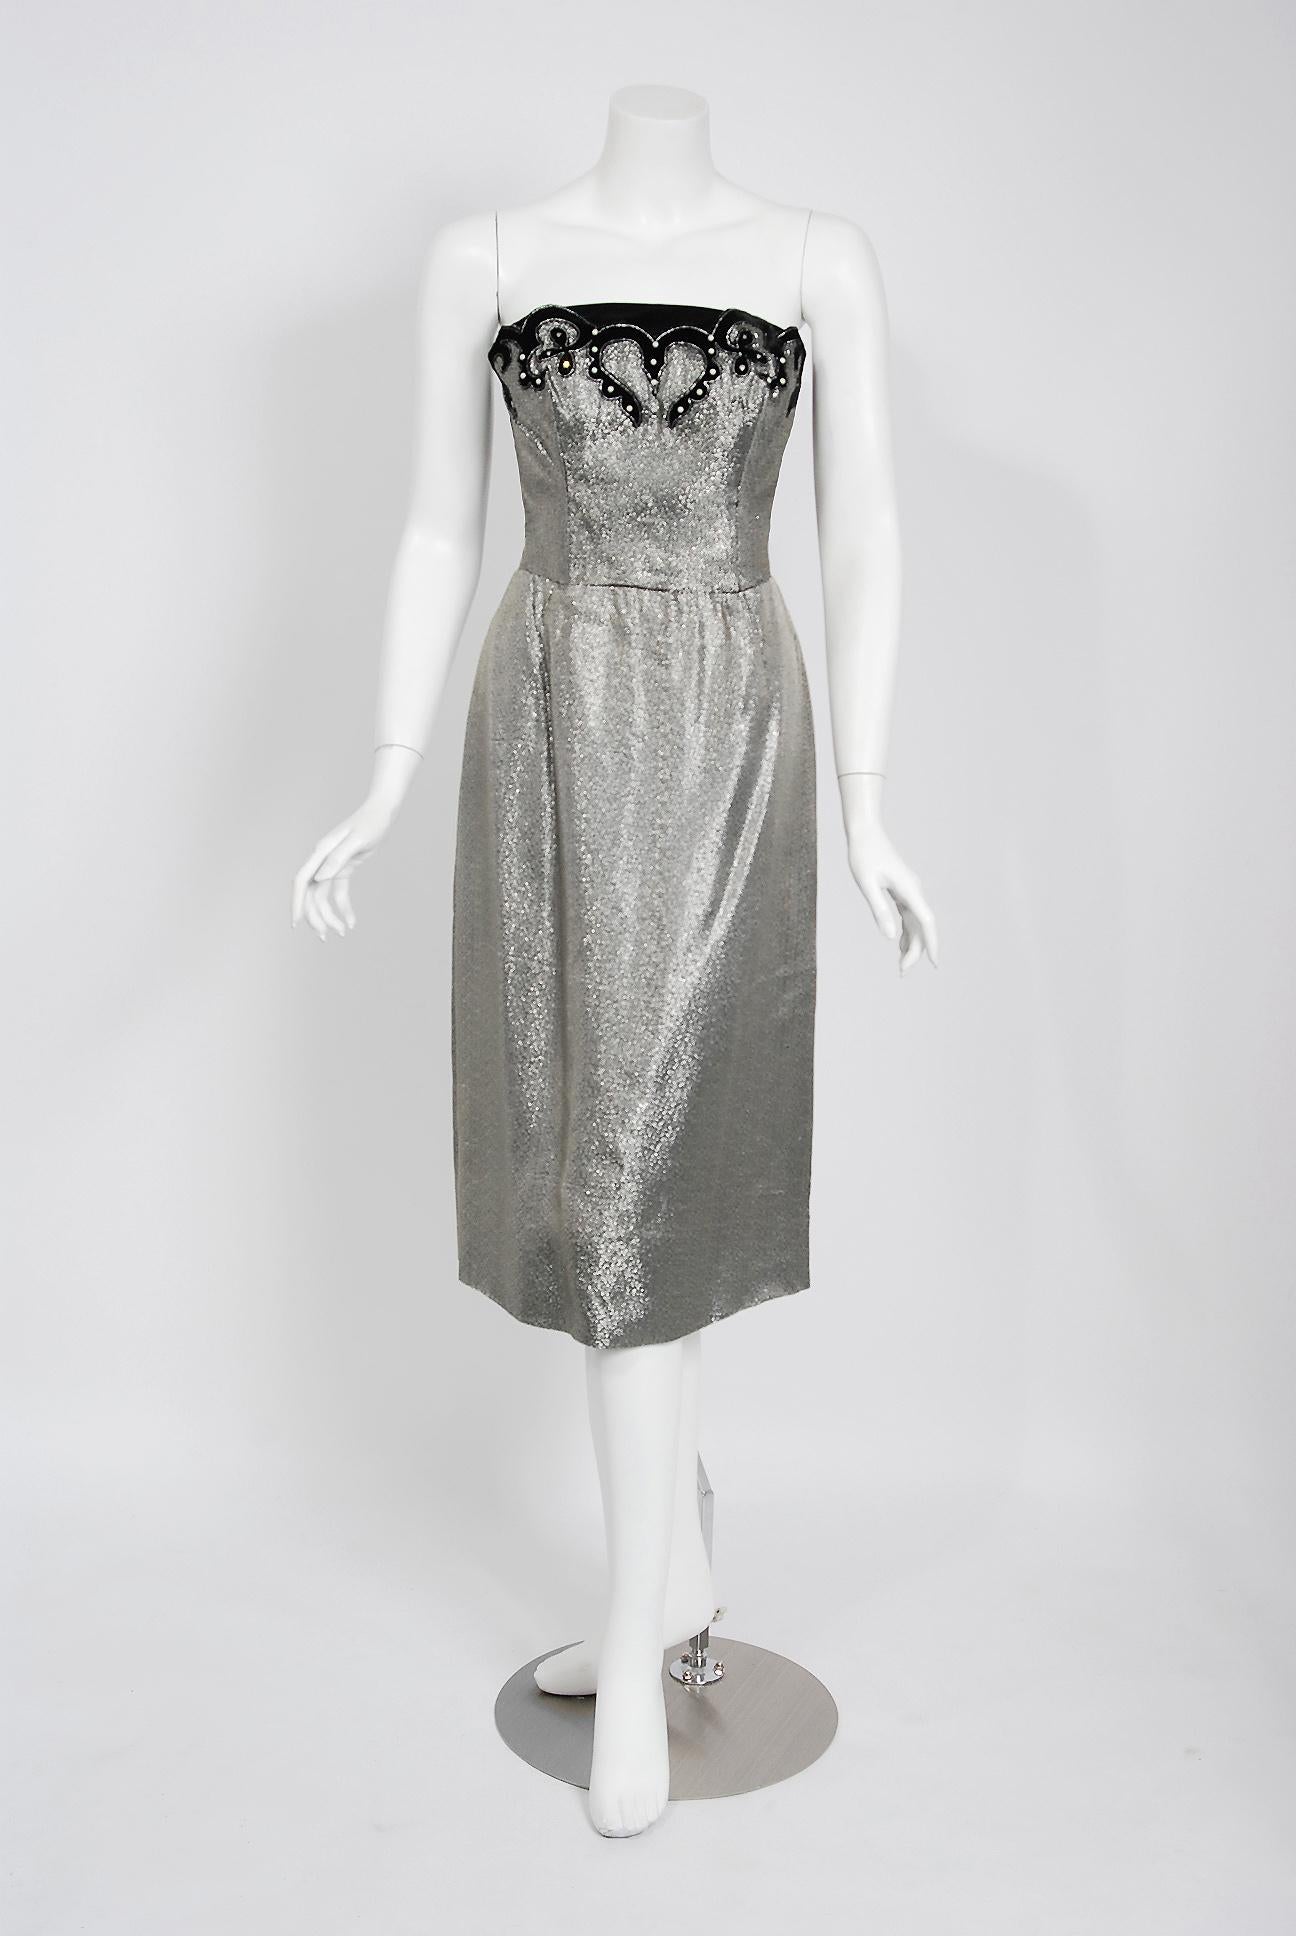 A seductive and highly stylized 1950's sparkling silver lamé dress ensemble by the famous Lilli Diamond label. The silhouette is classic pin-up 